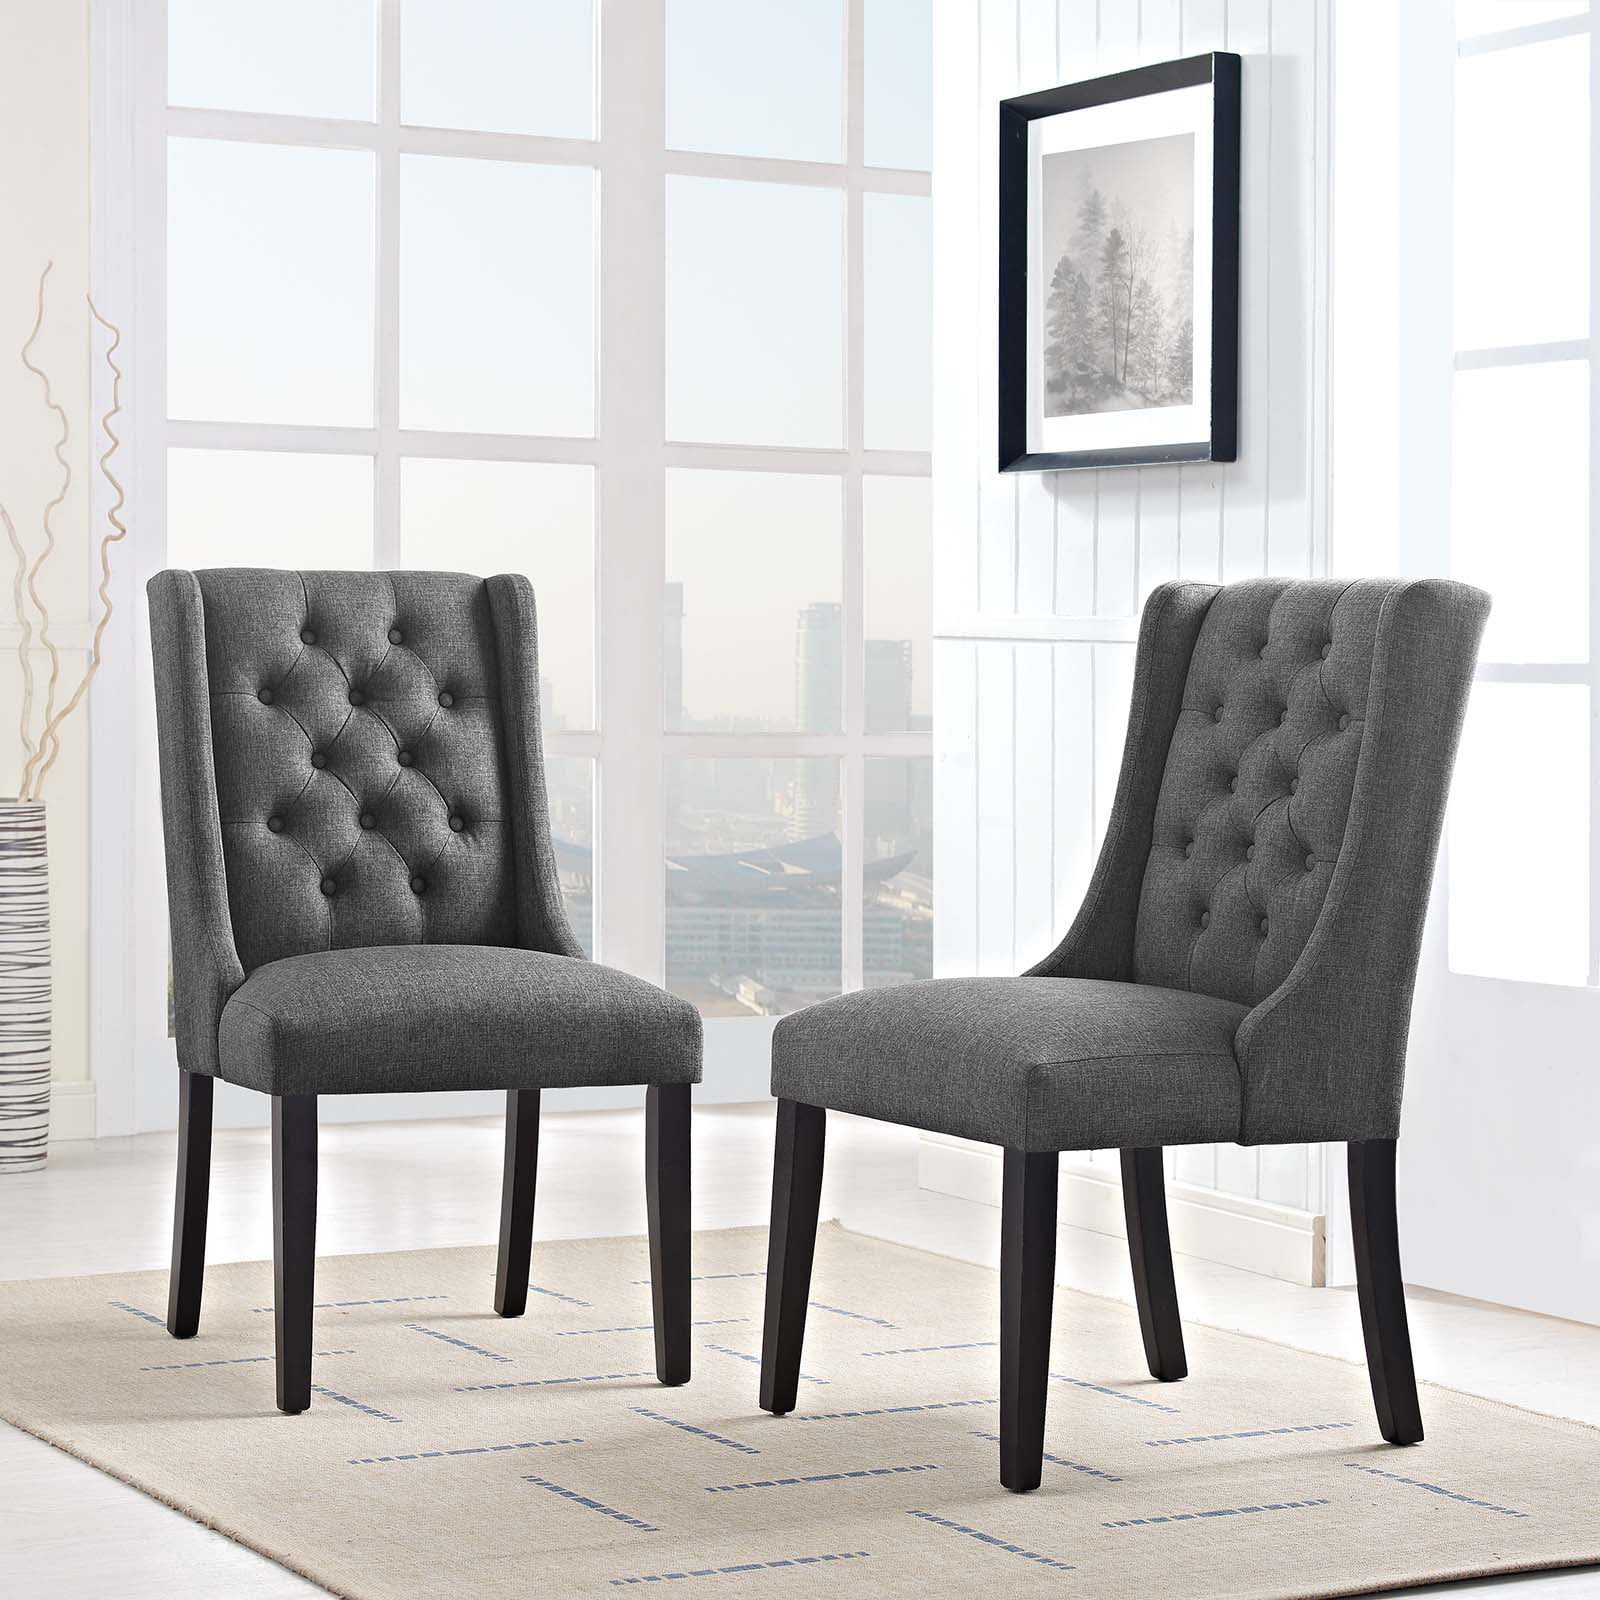 Baronet Dining Chair Fabric Set of 2 in Gray - Walmart.com ...
